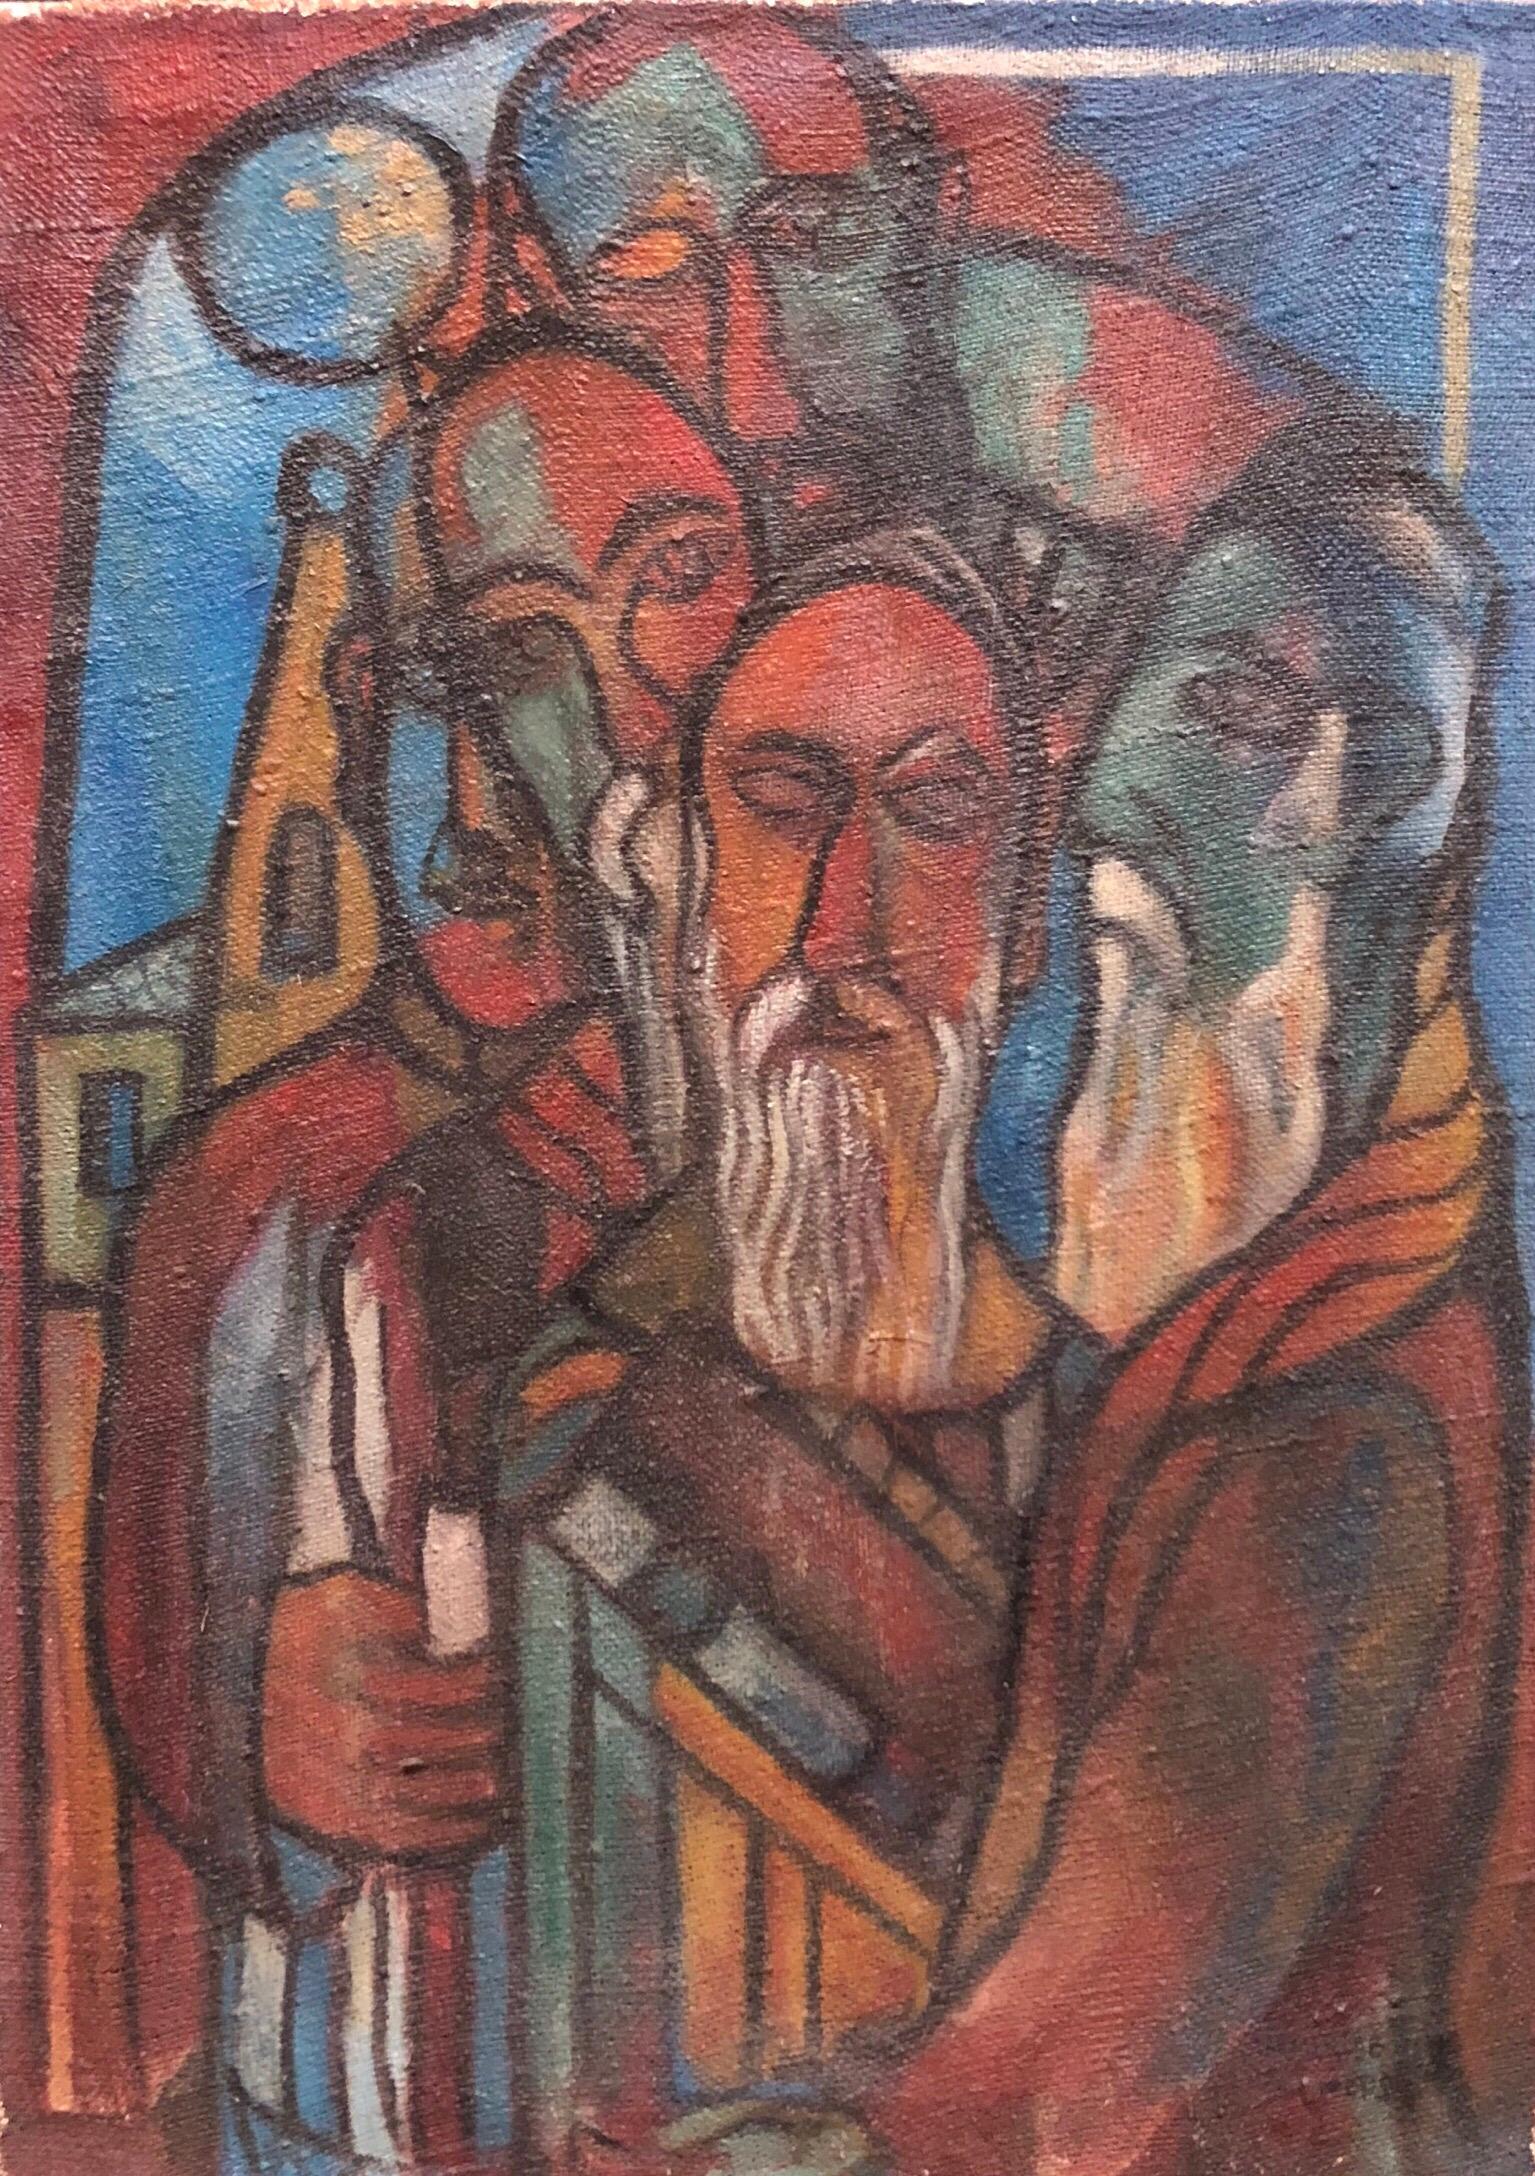 Unknown Figurative Painting - Modernist Judaica Oil Painting Blessing the New Moon, Jewish Prayer 